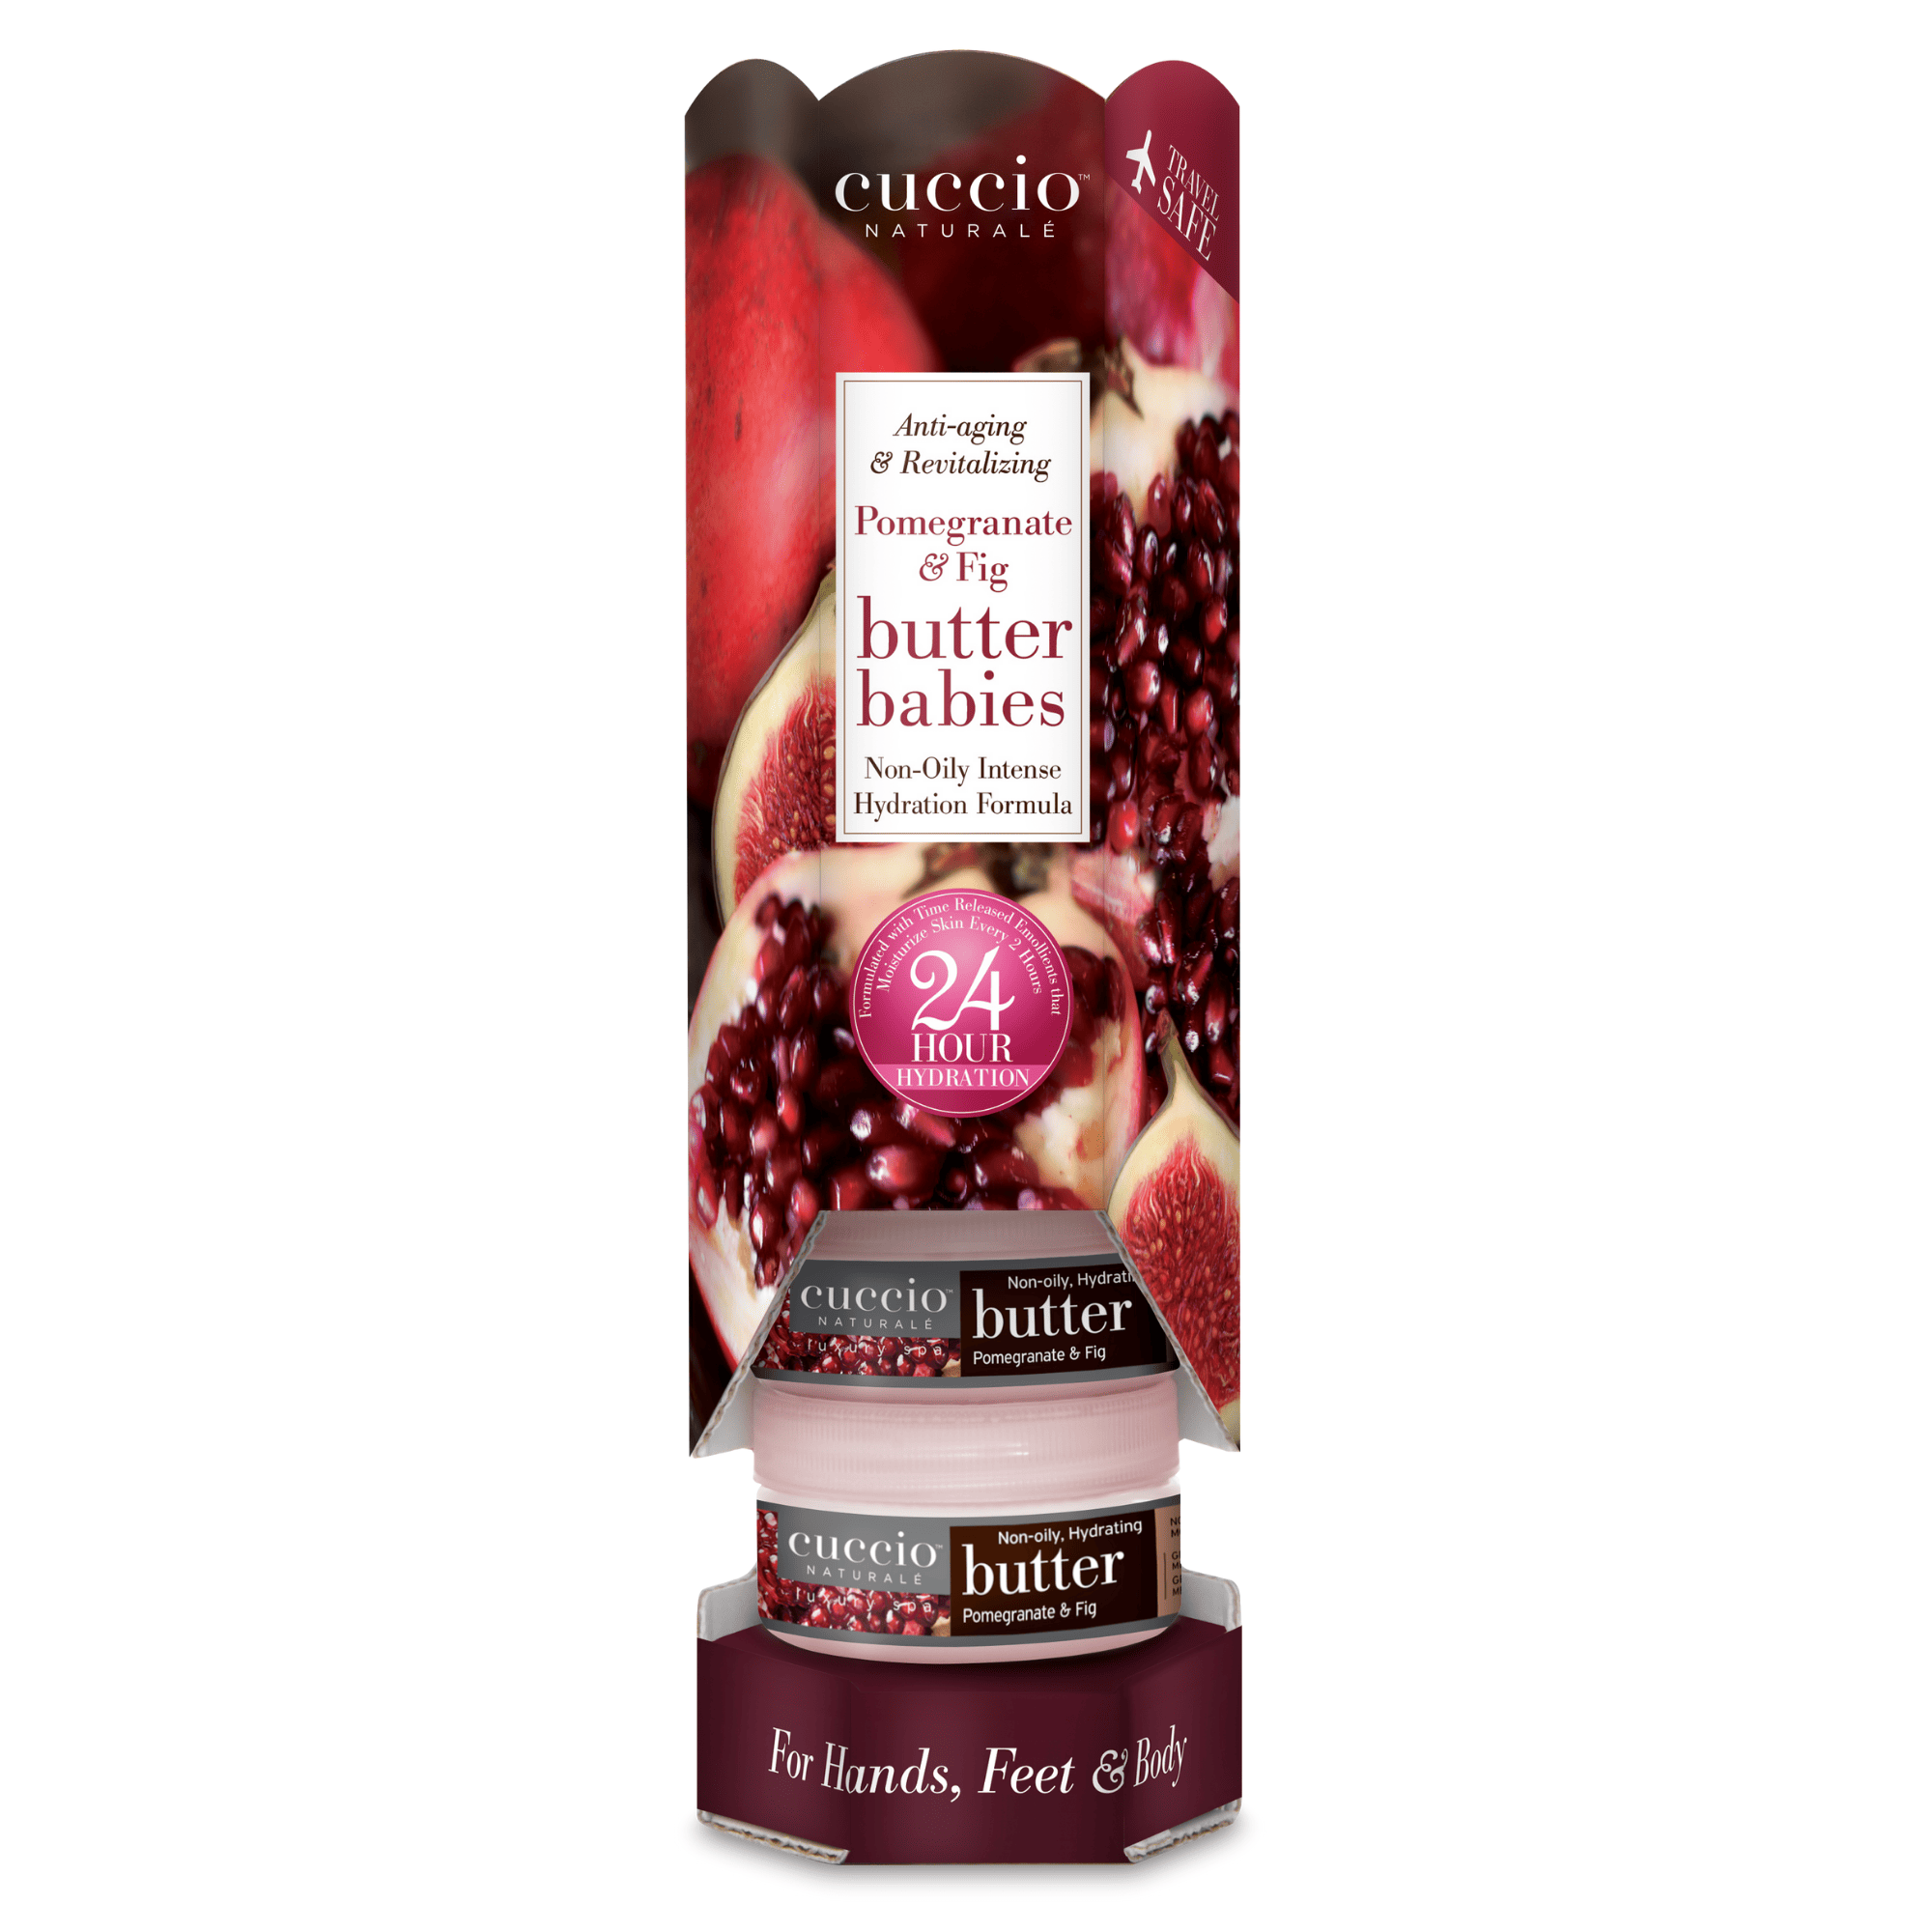 CUCCIO NATURALÉ HYDRATING BUTTER DISPLAY TOWER - POMEGRANATE & FIG